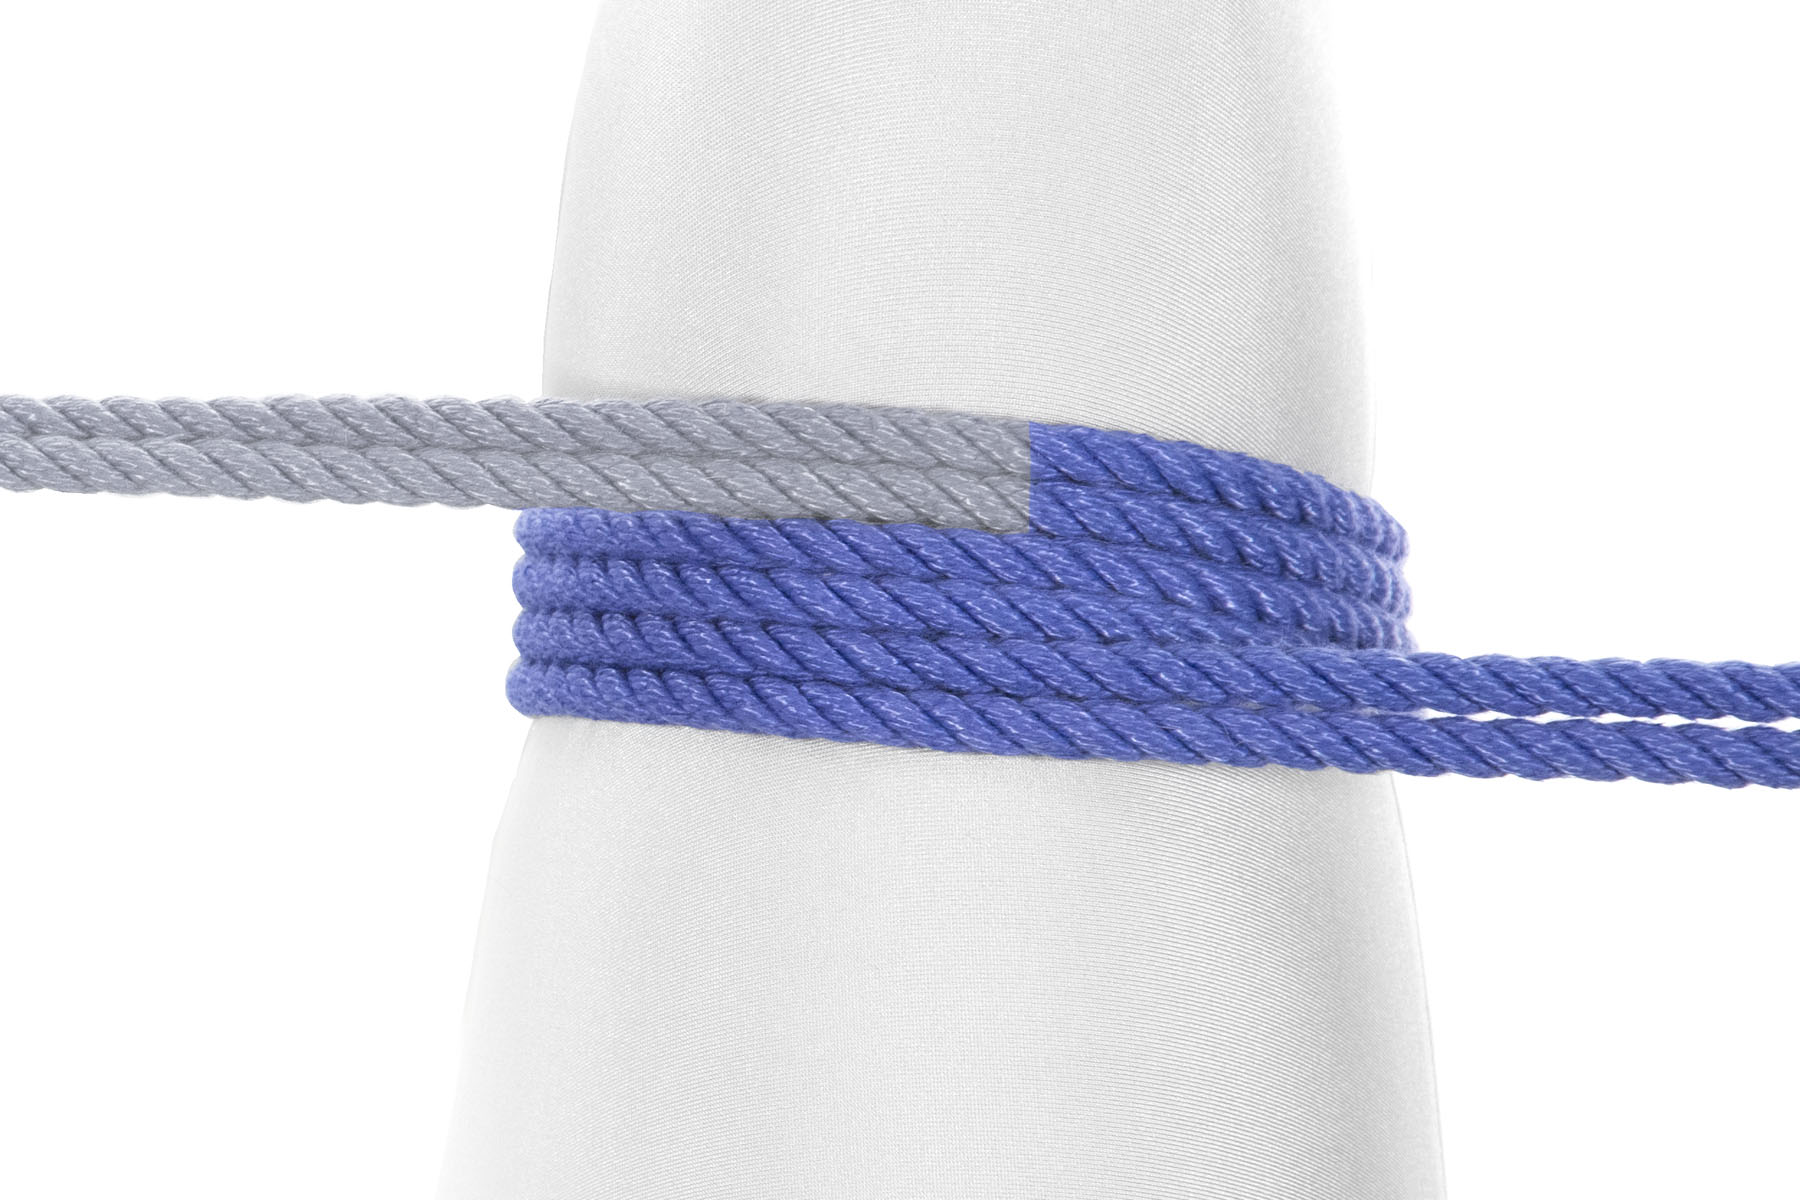 A closeup of the right leg. The rope enters from the left of the image and makes two clockwise wraps around the leg, with each wrap closer to the body than the previous one. The running end then exits to the right of the image.